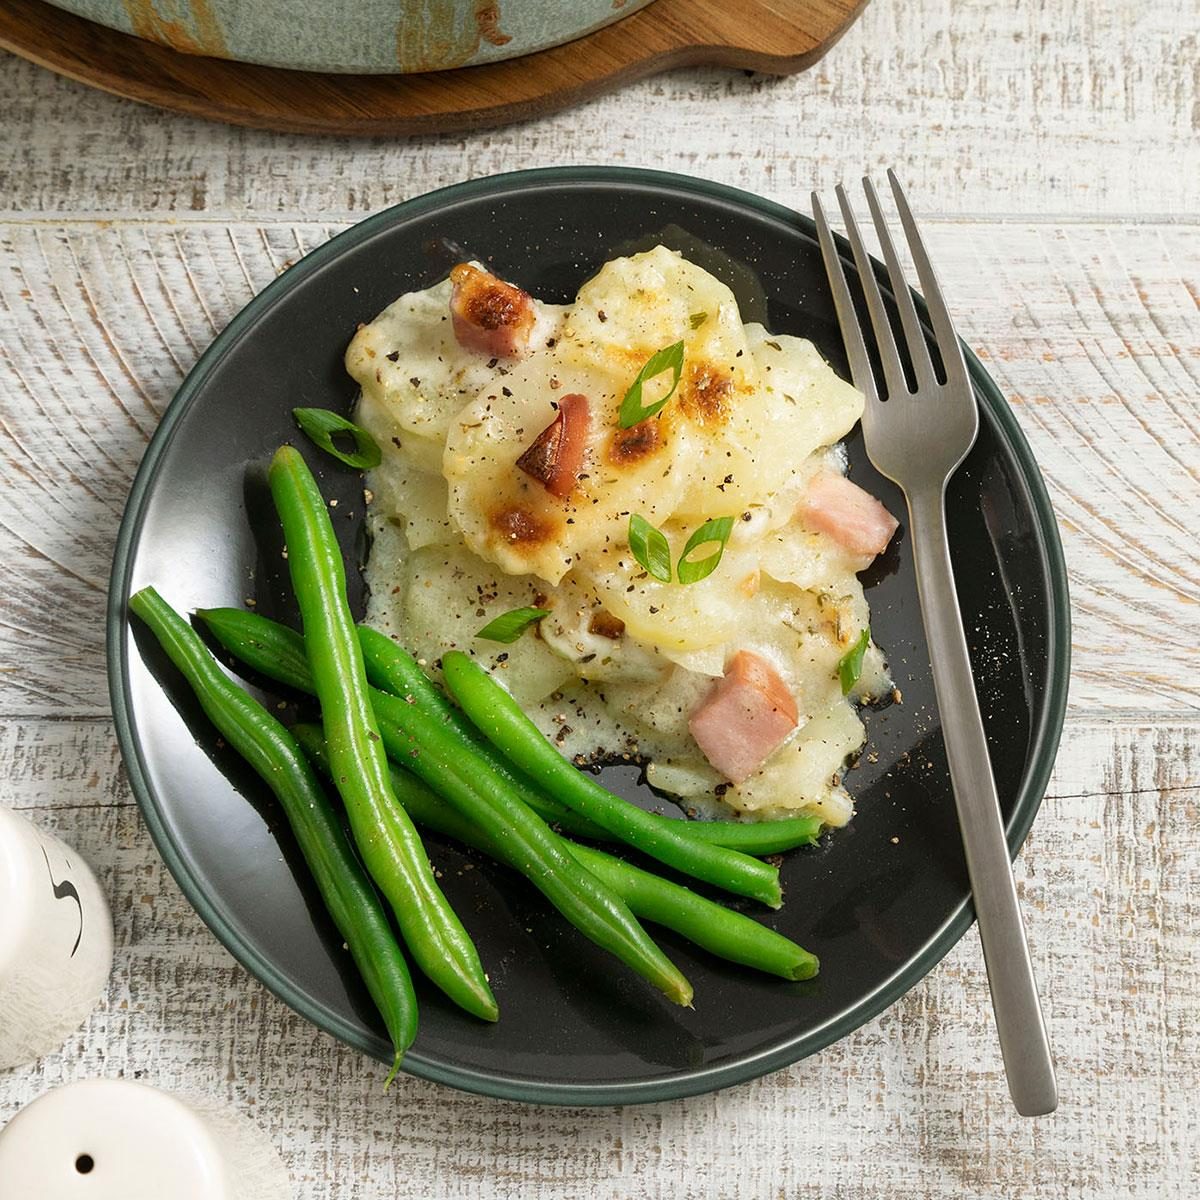 Scalloped Potatoes With Ham Exps Ft23 10277 St 1215 2